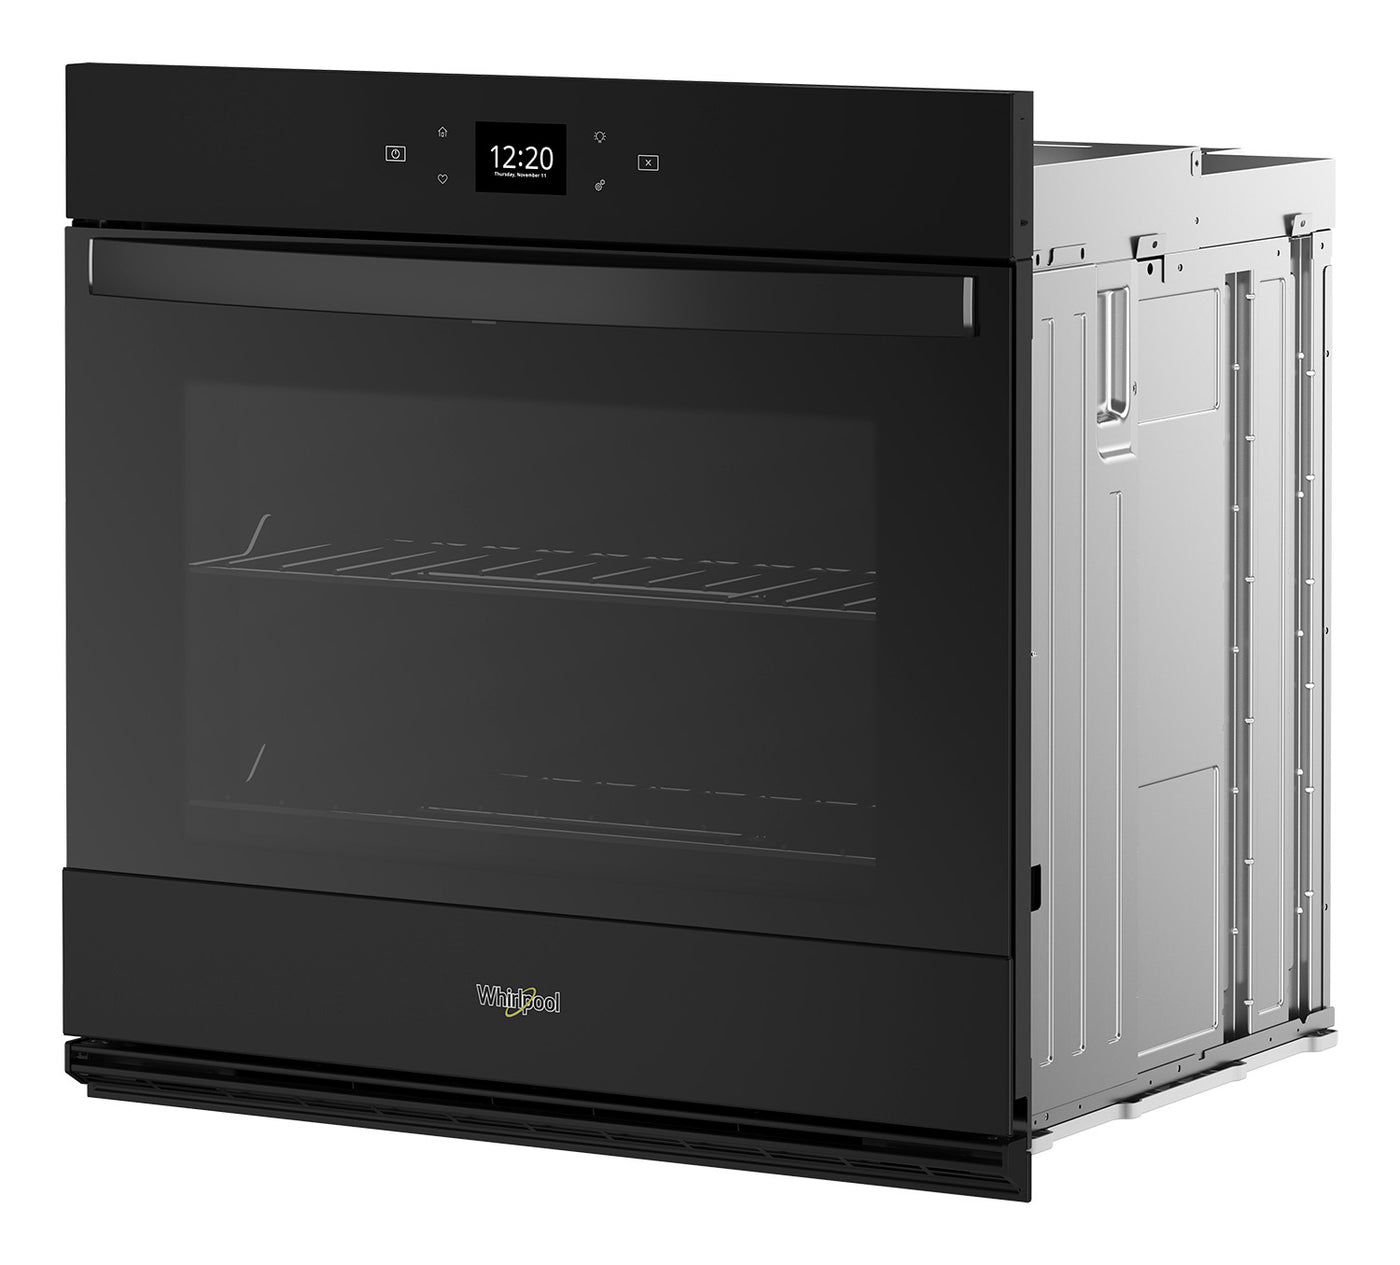 Whirlpool Black Wall Oven (5.00 Cu Ft) - WOES5030LB